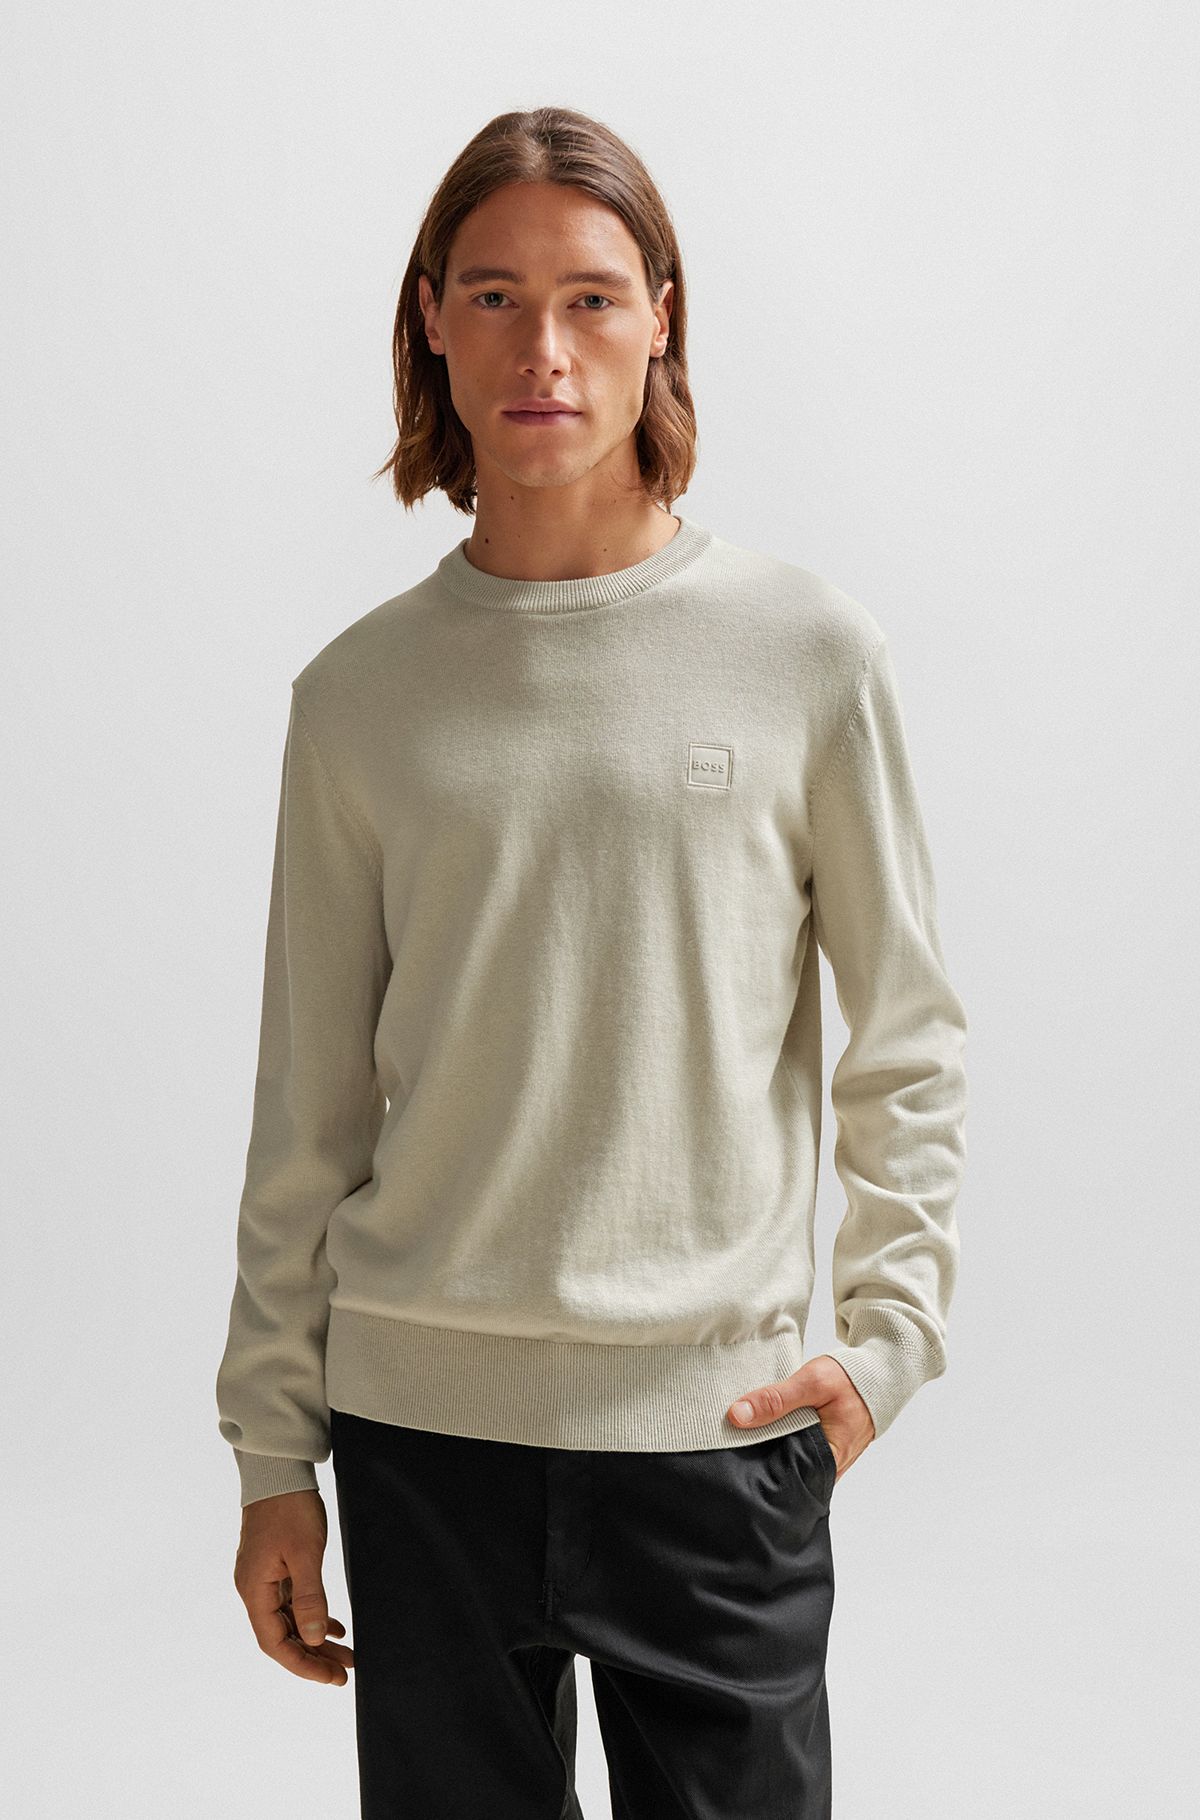 Crew-neck sweater in cotton and cashmere with logo, Light Beige